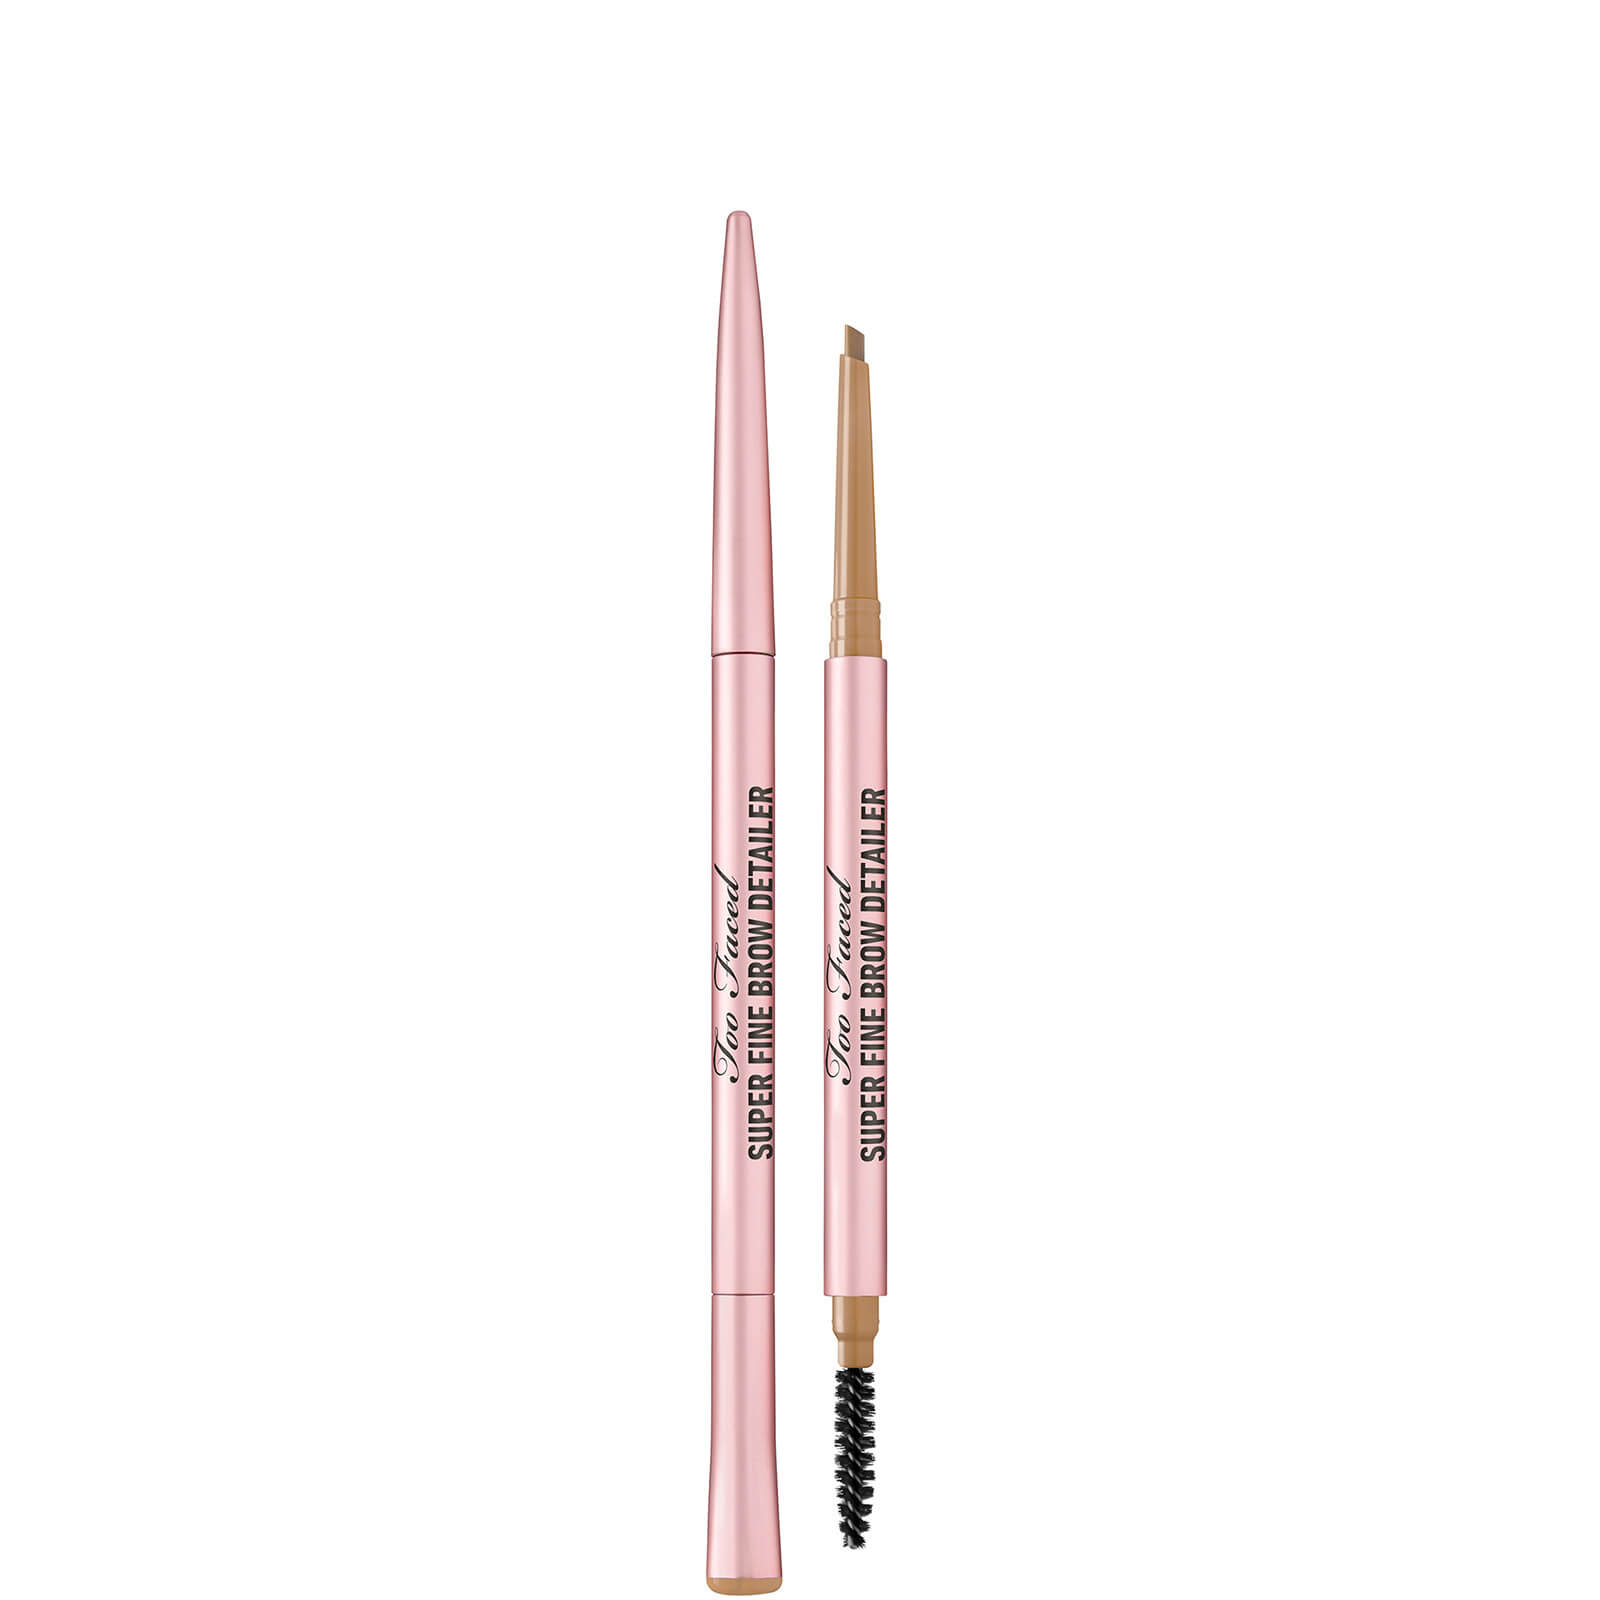 Too Faced Superfine Brow Detailer Ultra Slim Brow Pencil 0.08g (Various Shades) - Natural Blonde